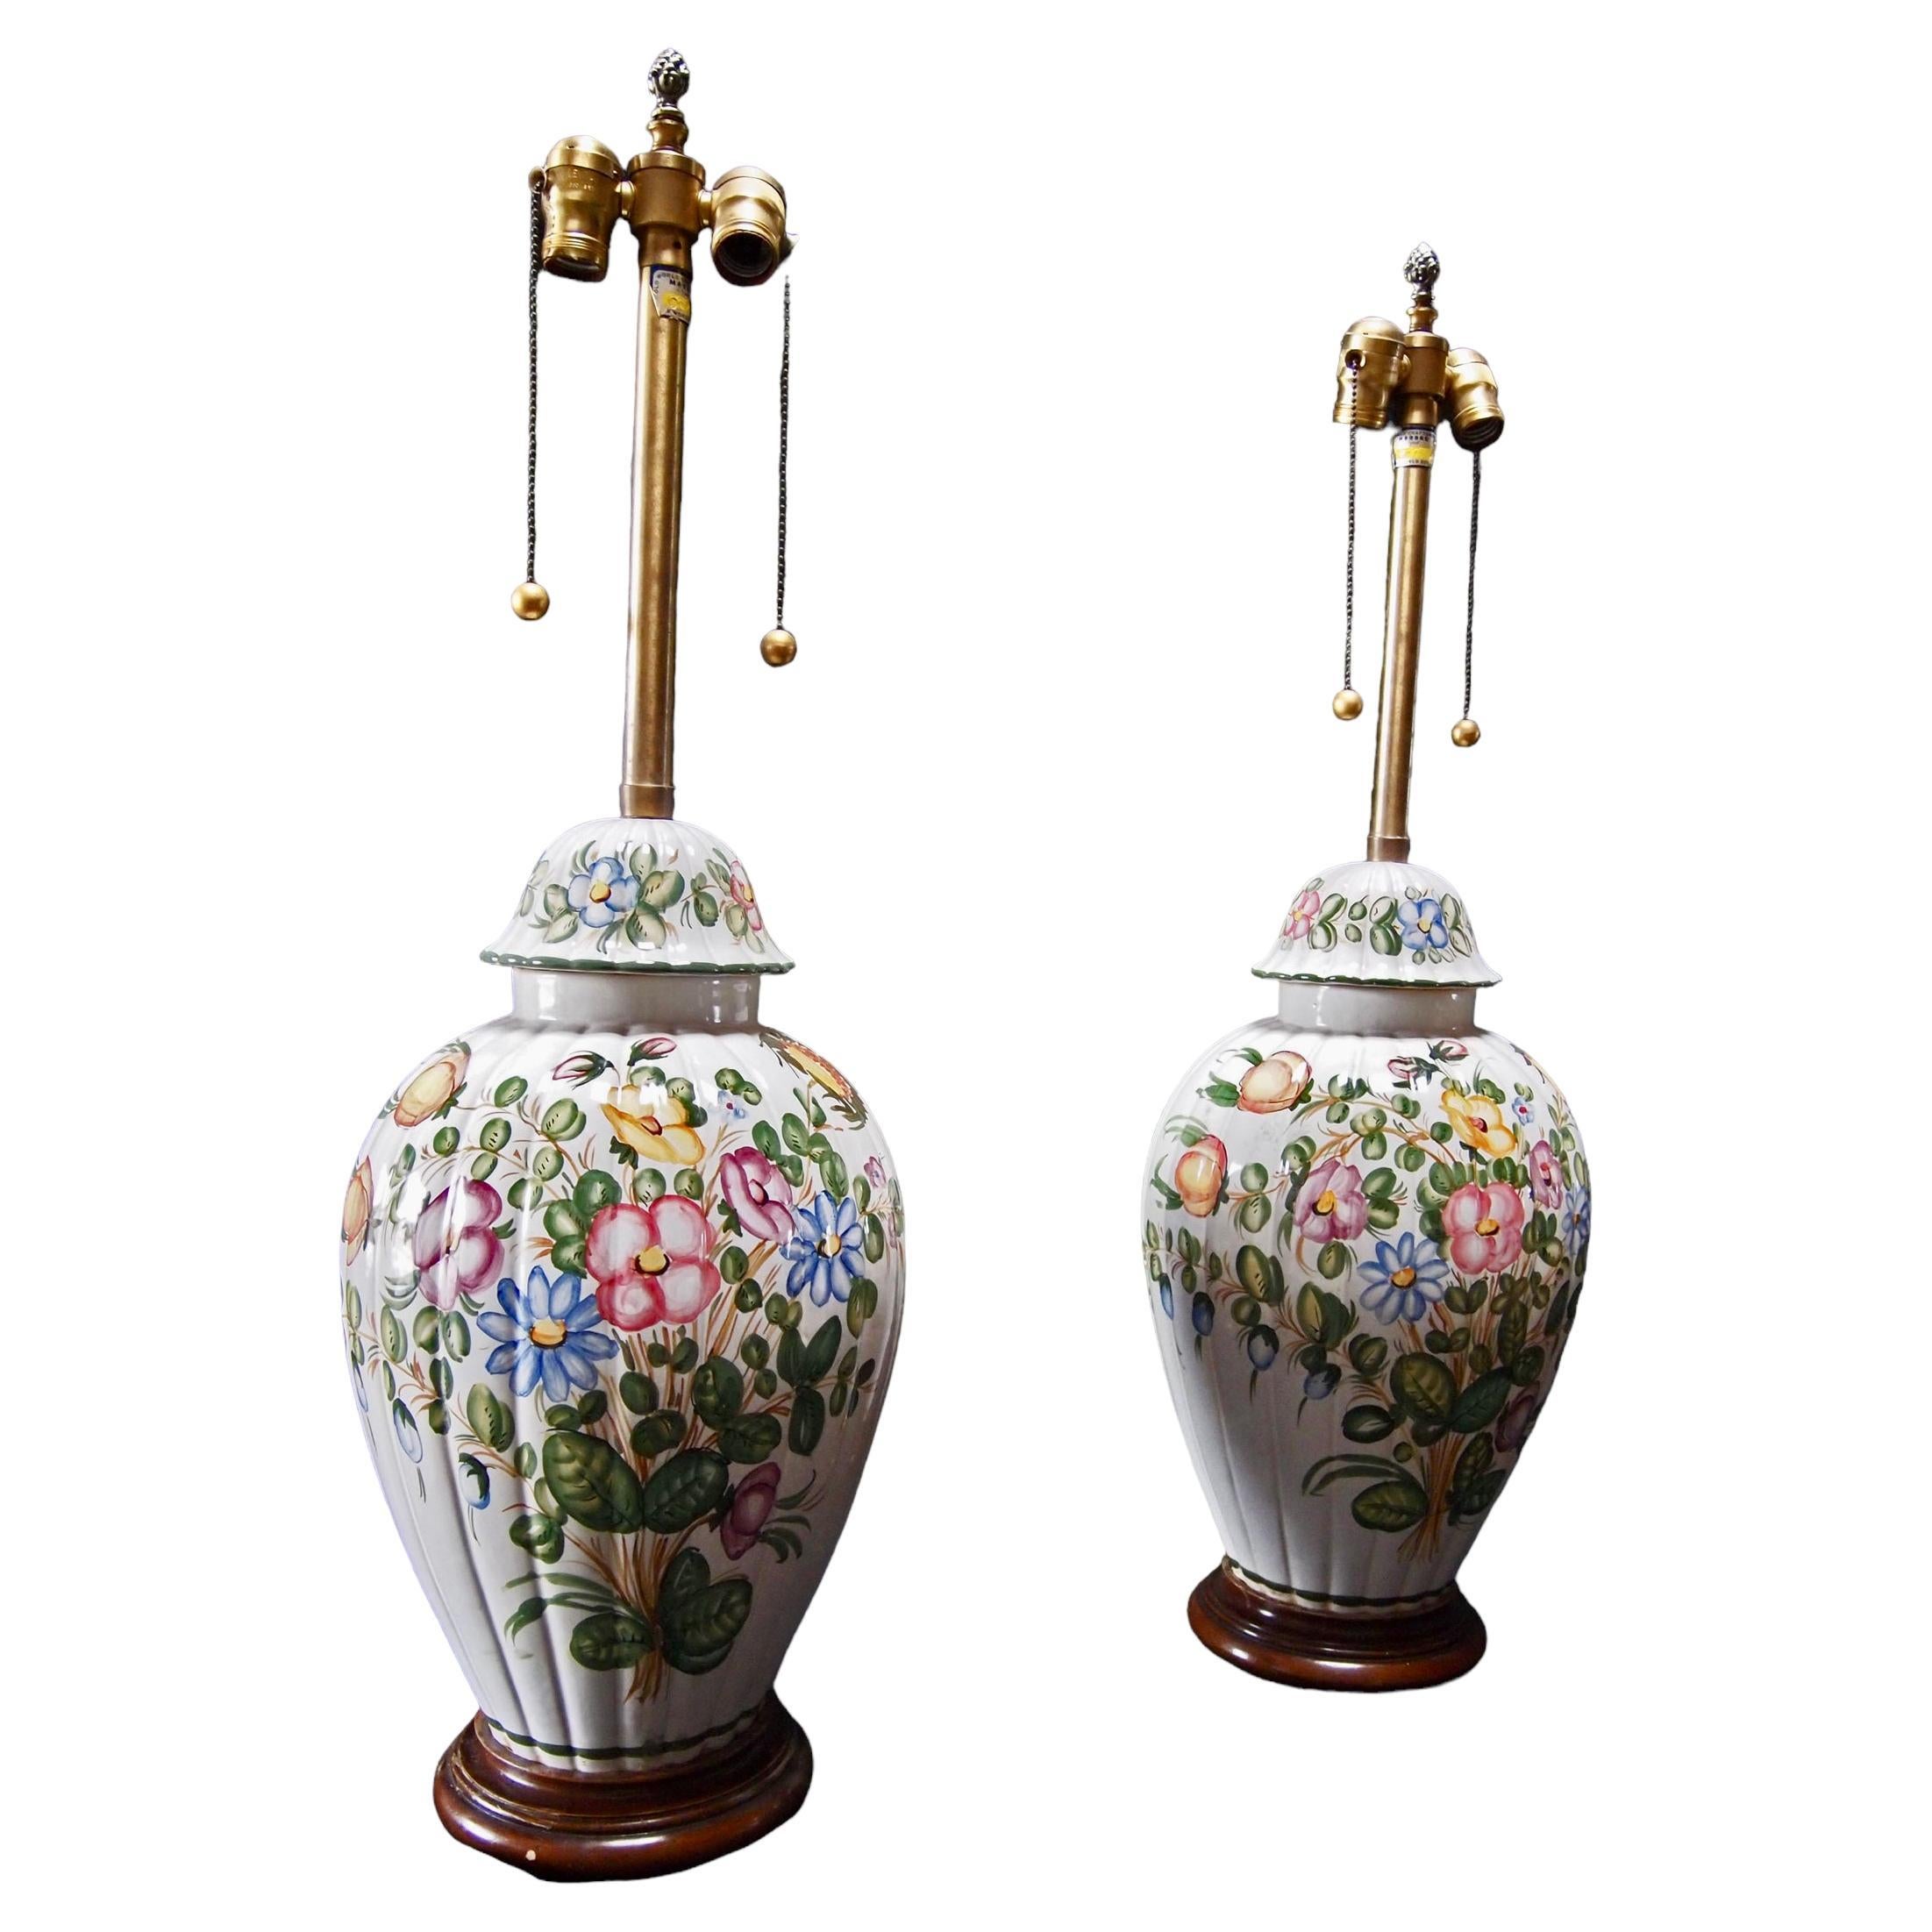 Pair of Large Floral Decorated Lamps Lamps by Marbro Lamp Co.